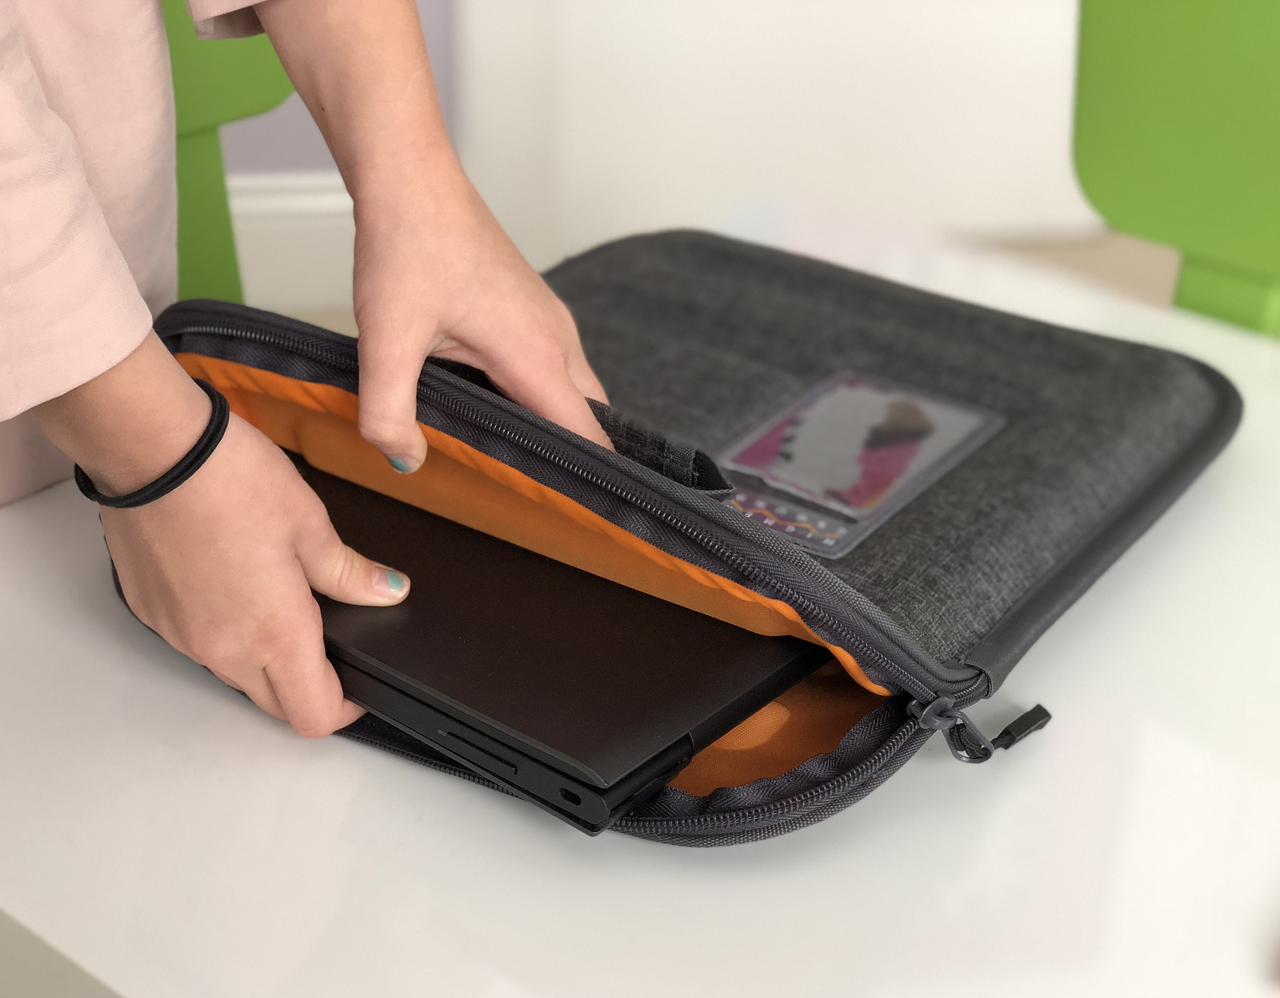 Protective Laptop Sleeve with Shoulder Strap for 11-13 Devices